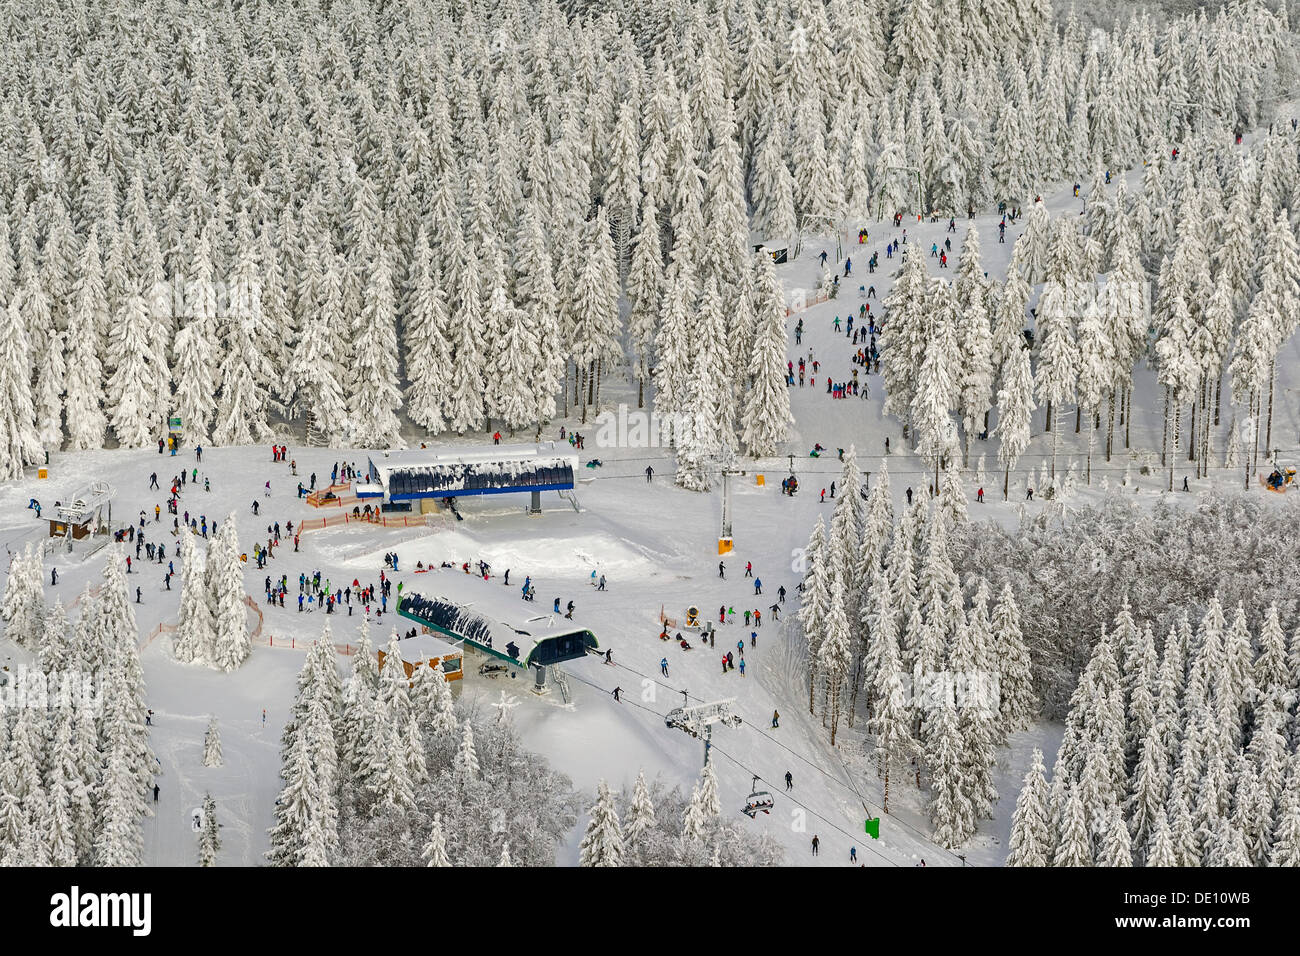 Aerial view, mountain station of the ski lift in winter Stock Photo